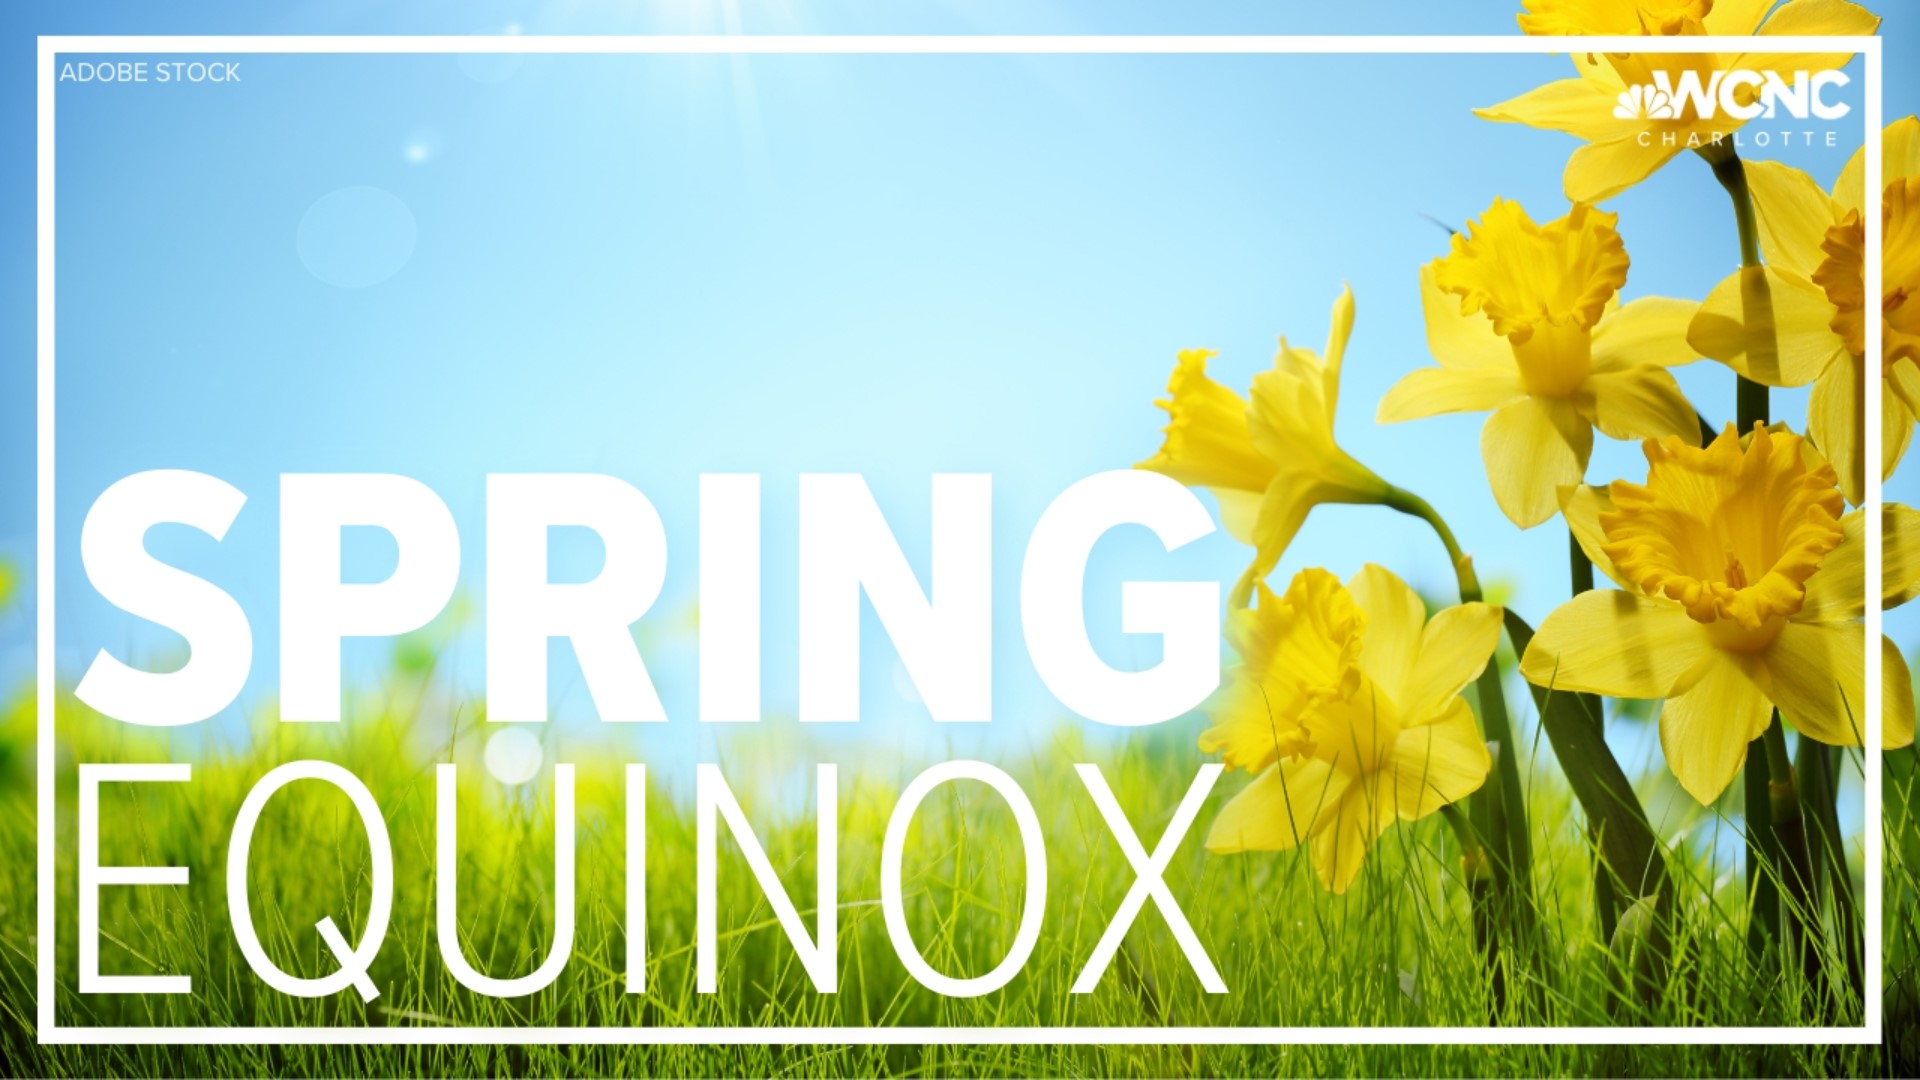 Despite cold temperatures, spring arrived Monday with the spring equinox